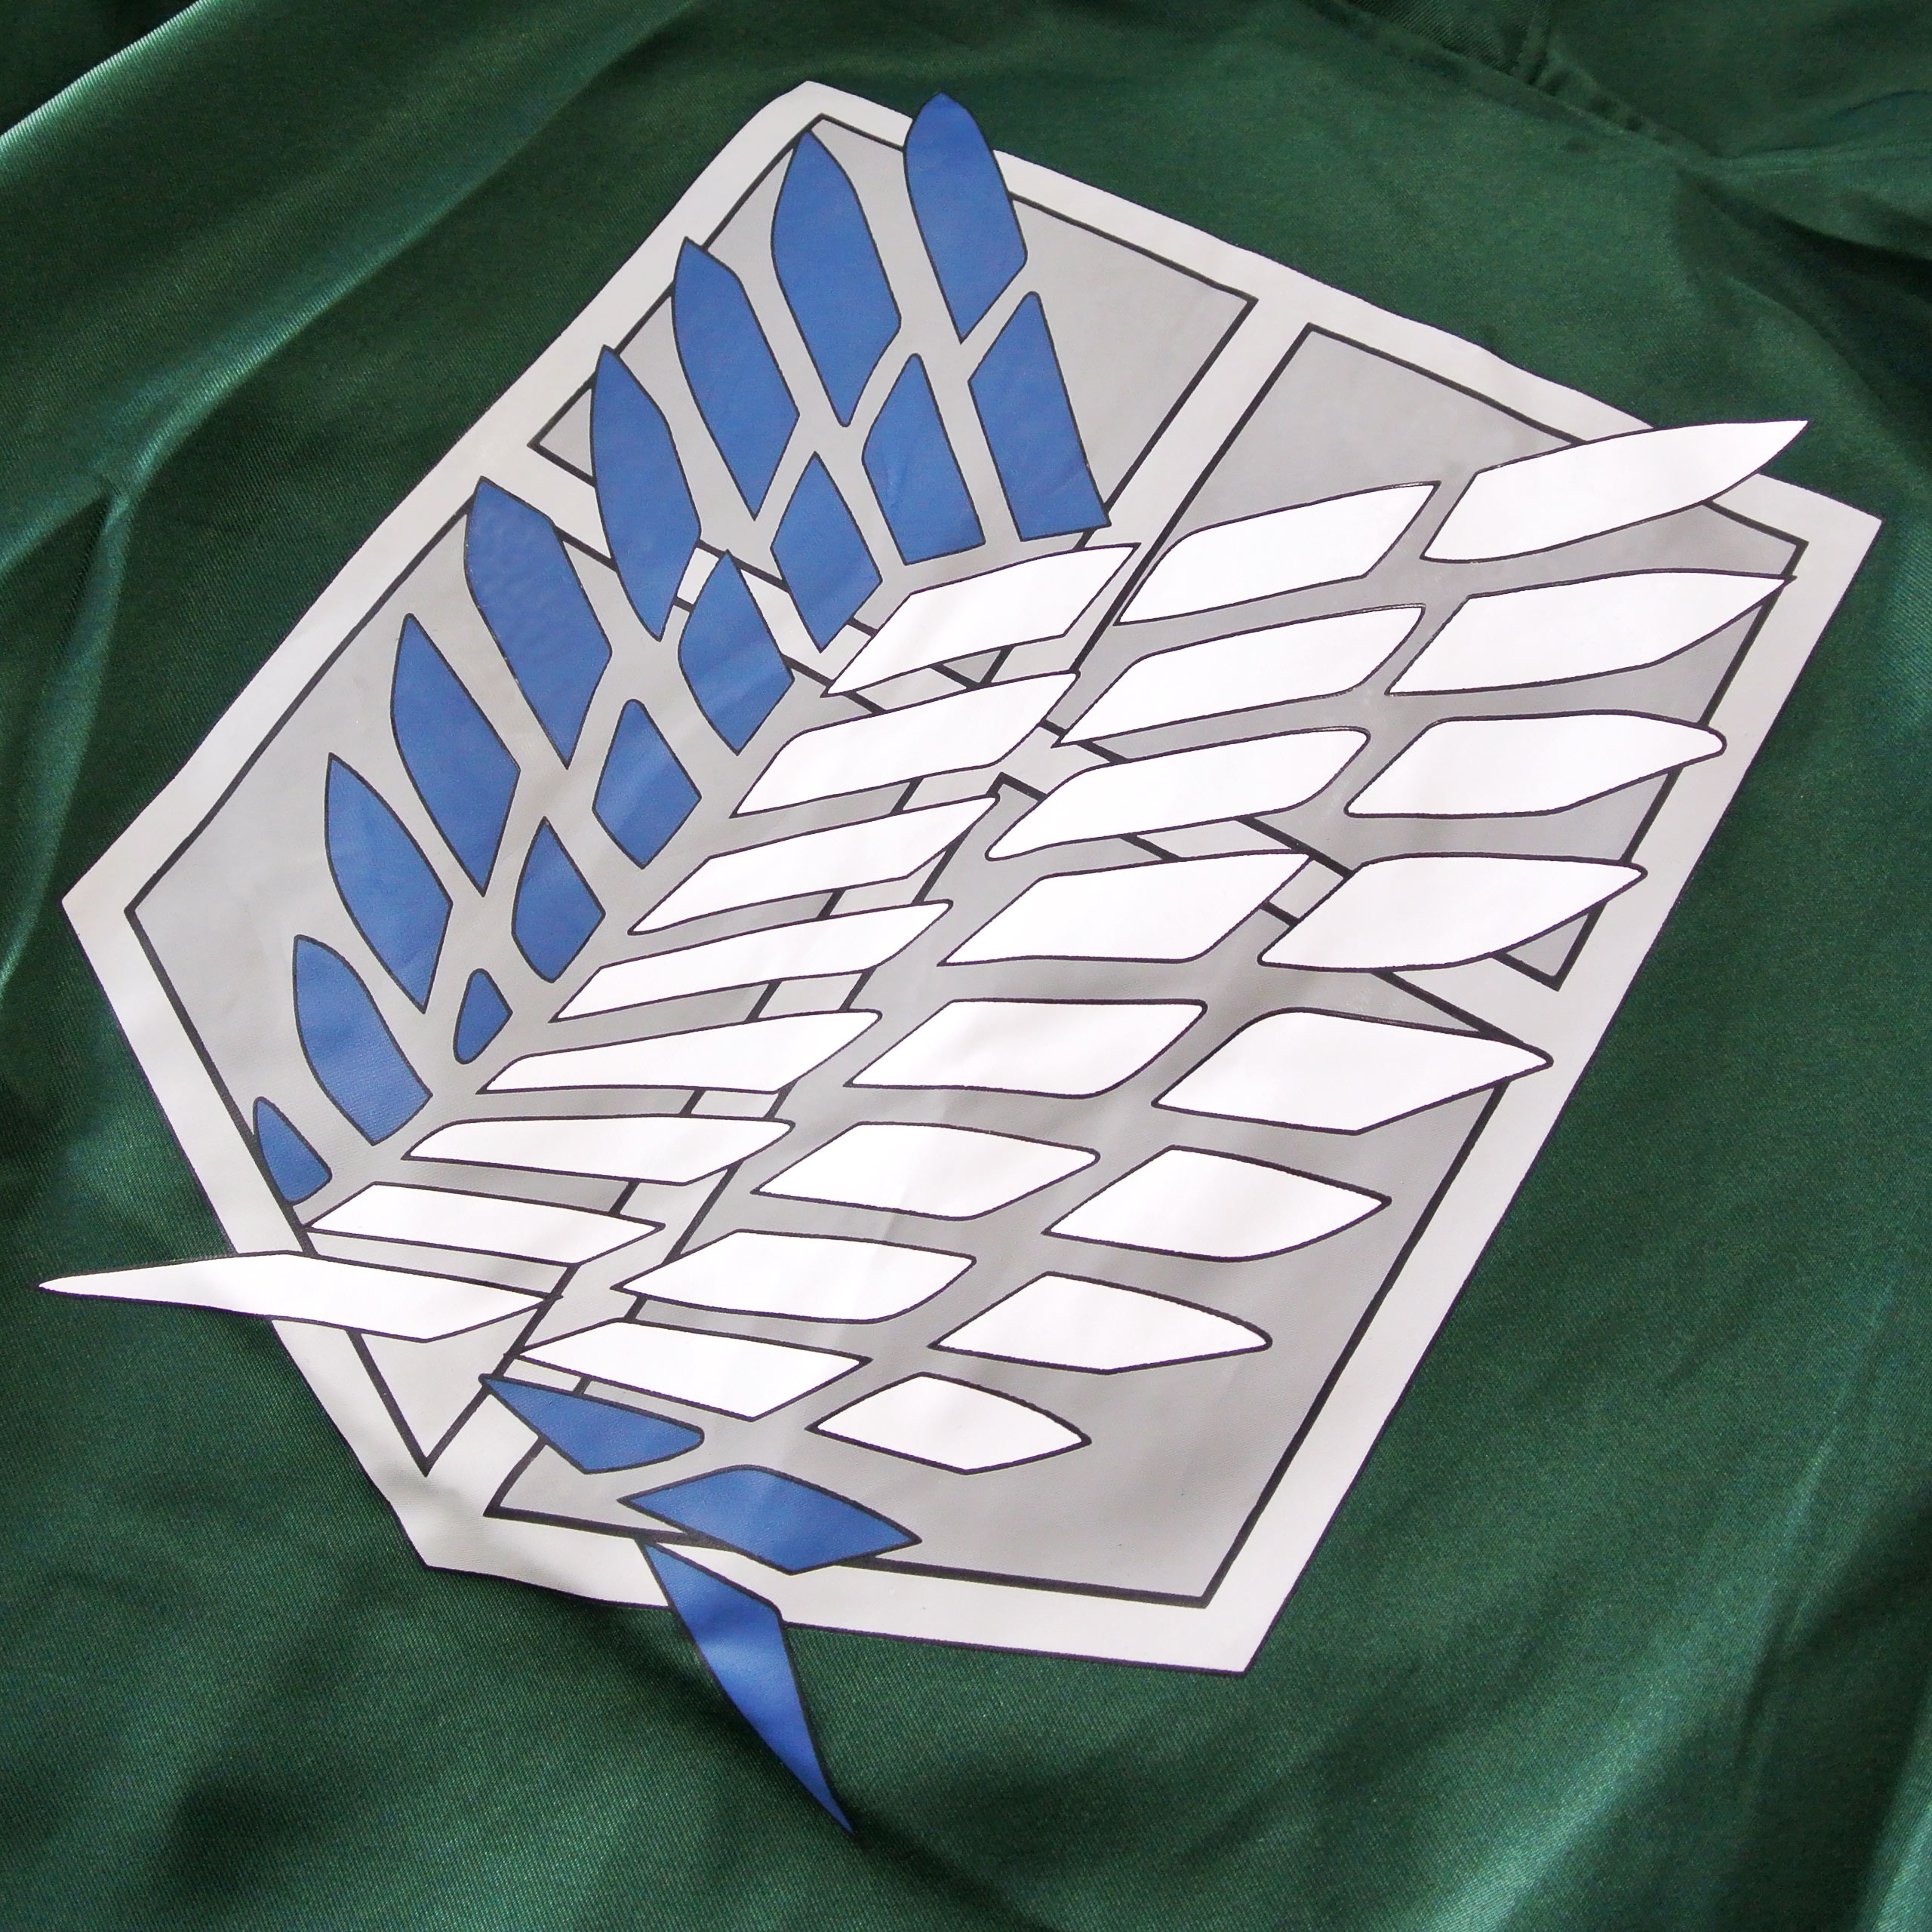 Attack on Titan - Survey Corps Cloak with Hood